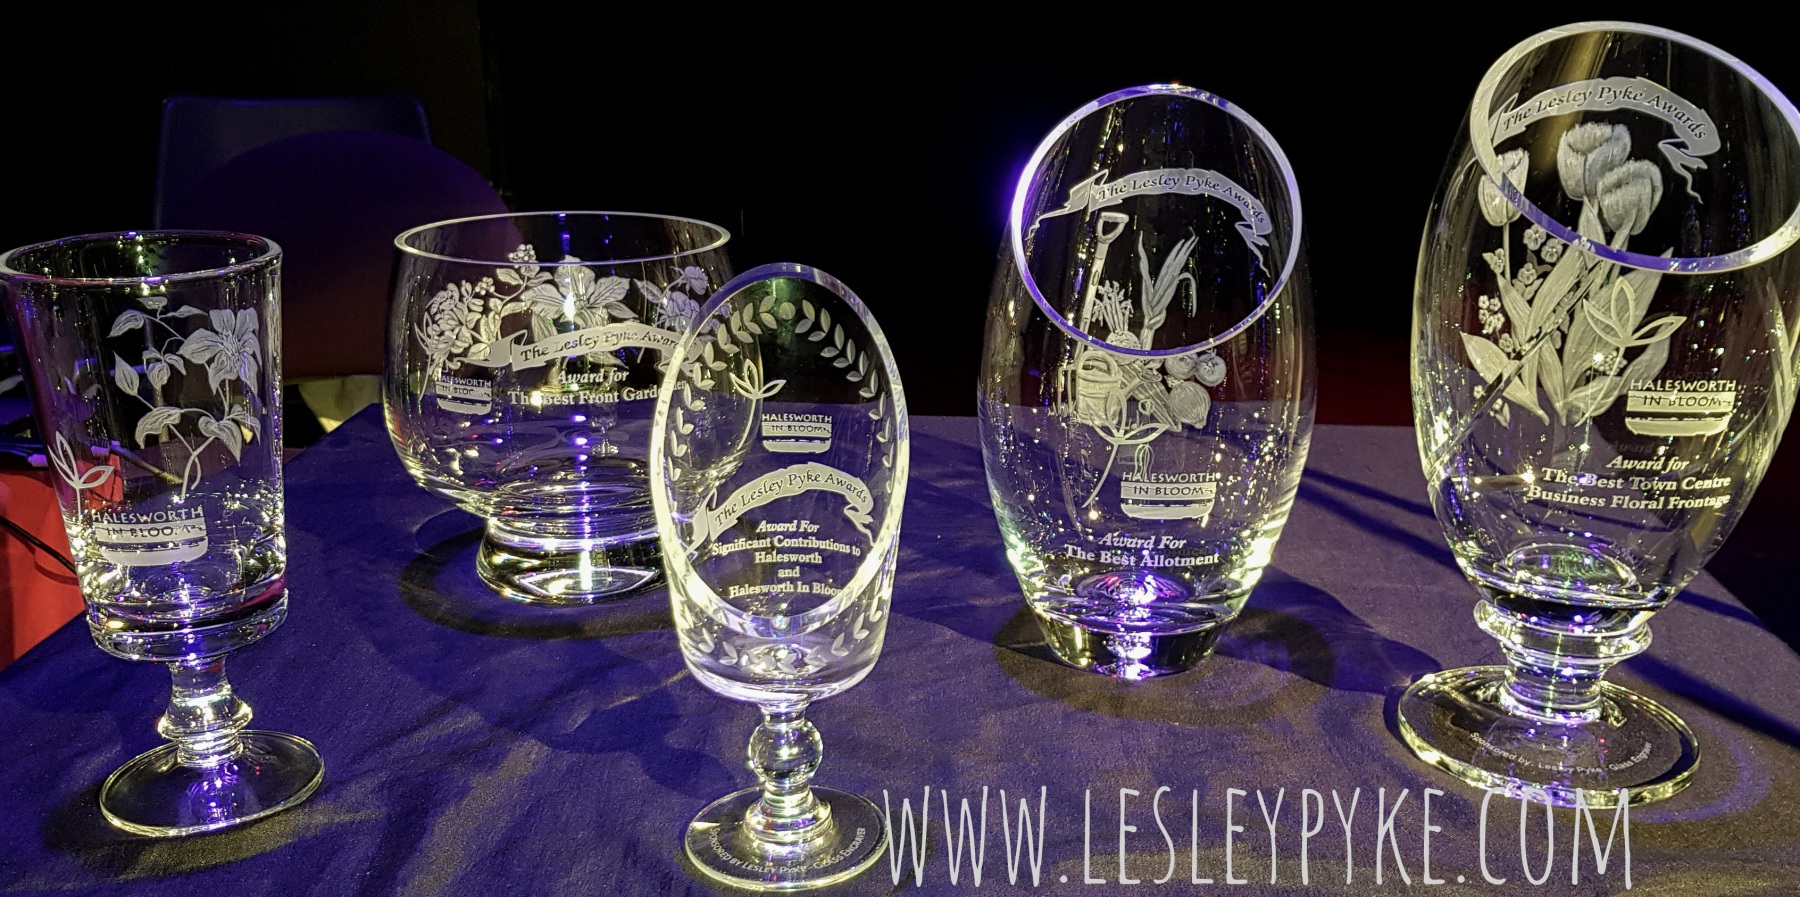 Lesley Pyke Glass Engraving - Hi everyone, I hope that you are all